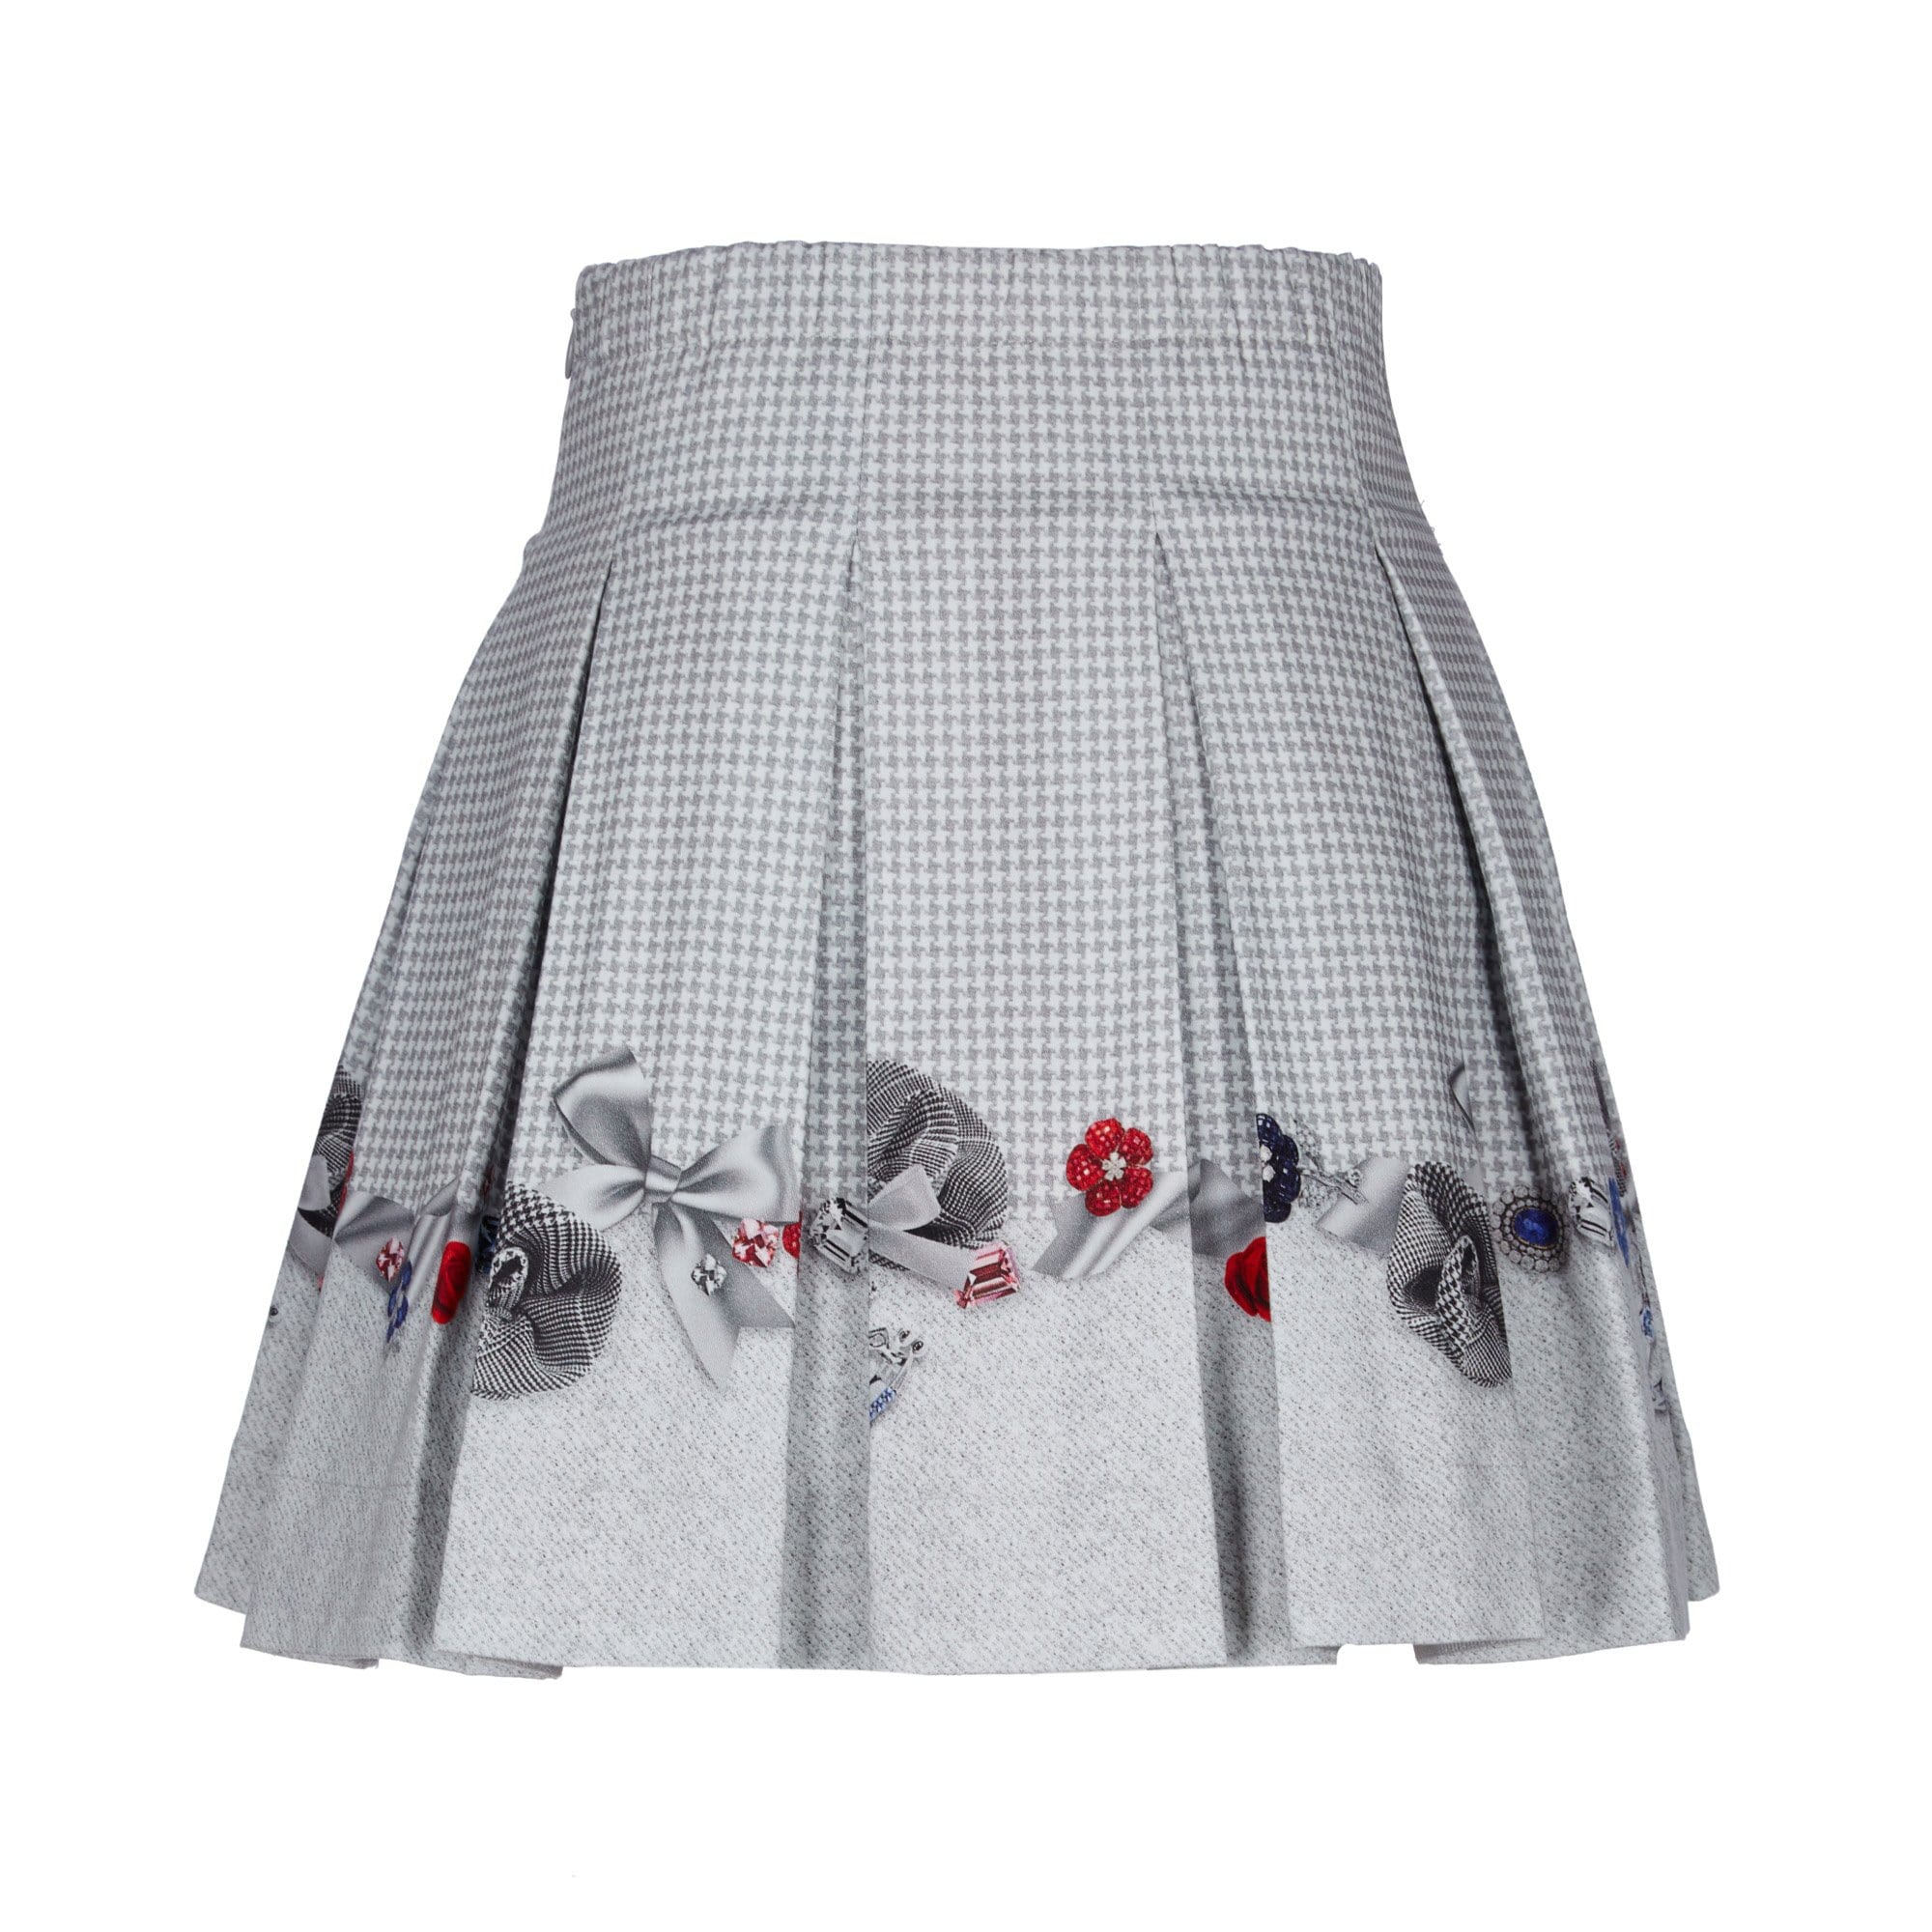 LAPIN HOUSE - Dog Tooth Skirt & Blouse - Grey